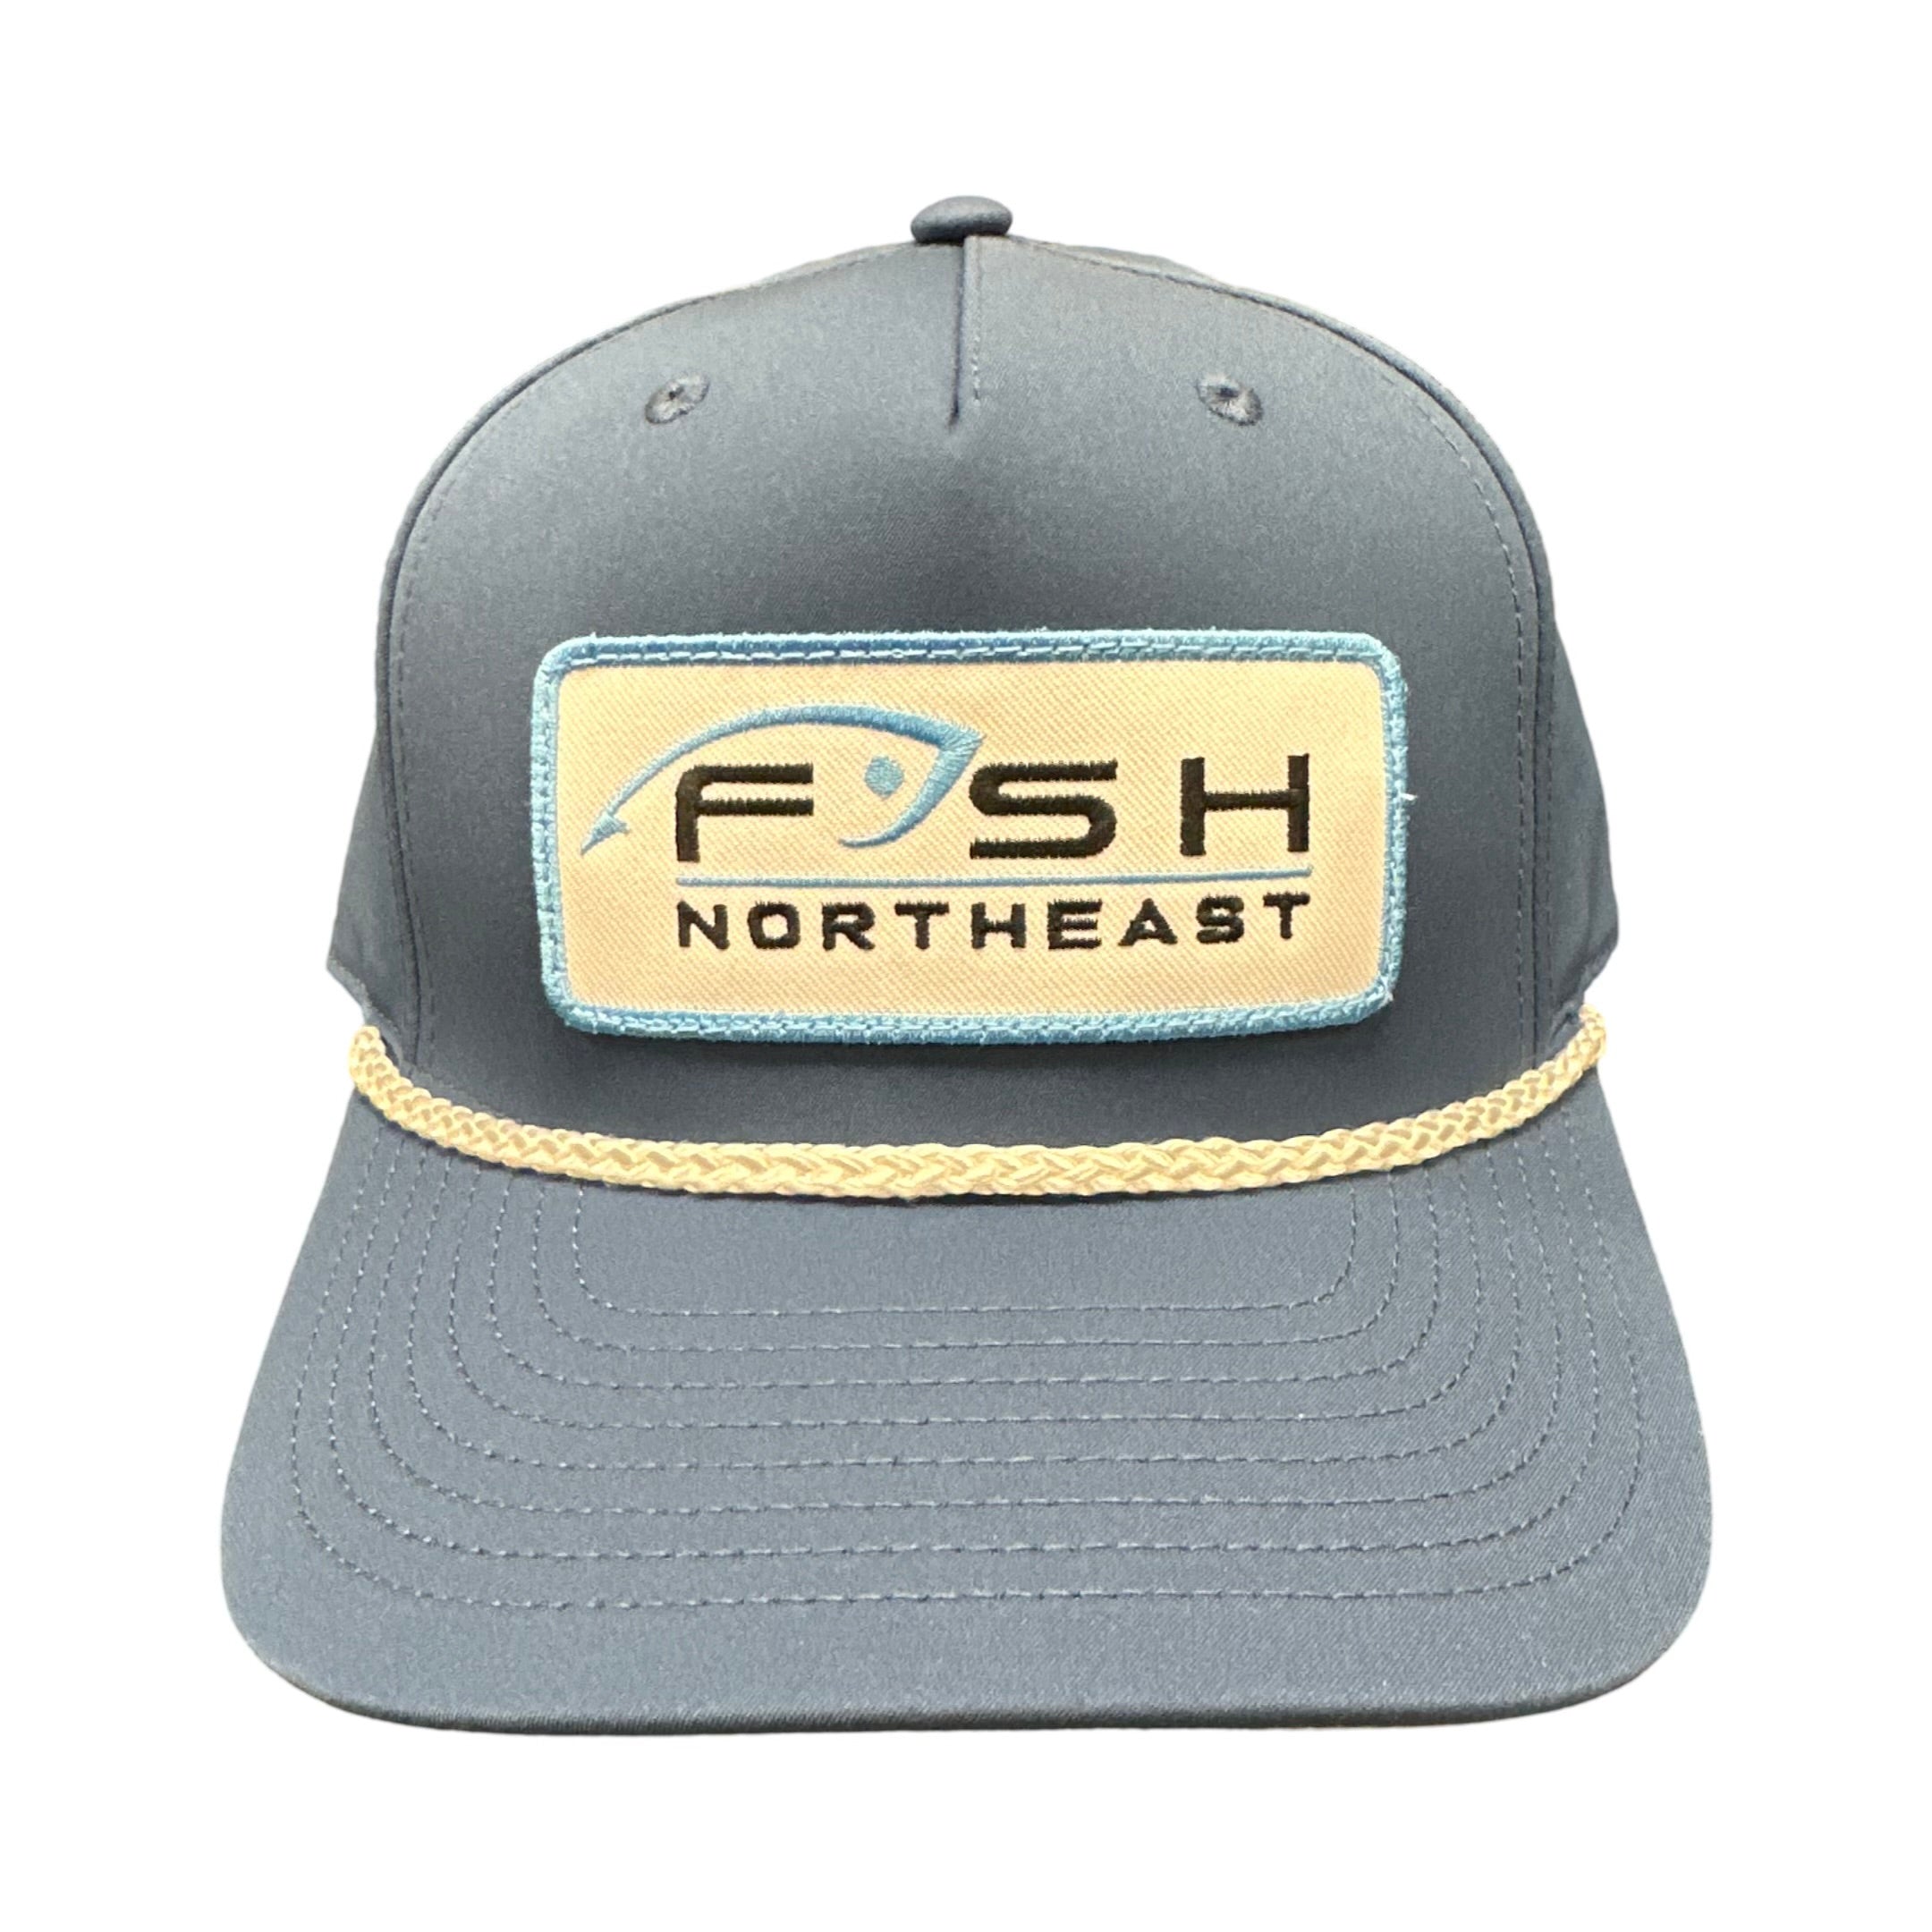 FISH & Tackle - FISH Northeast Patch Rope Hat